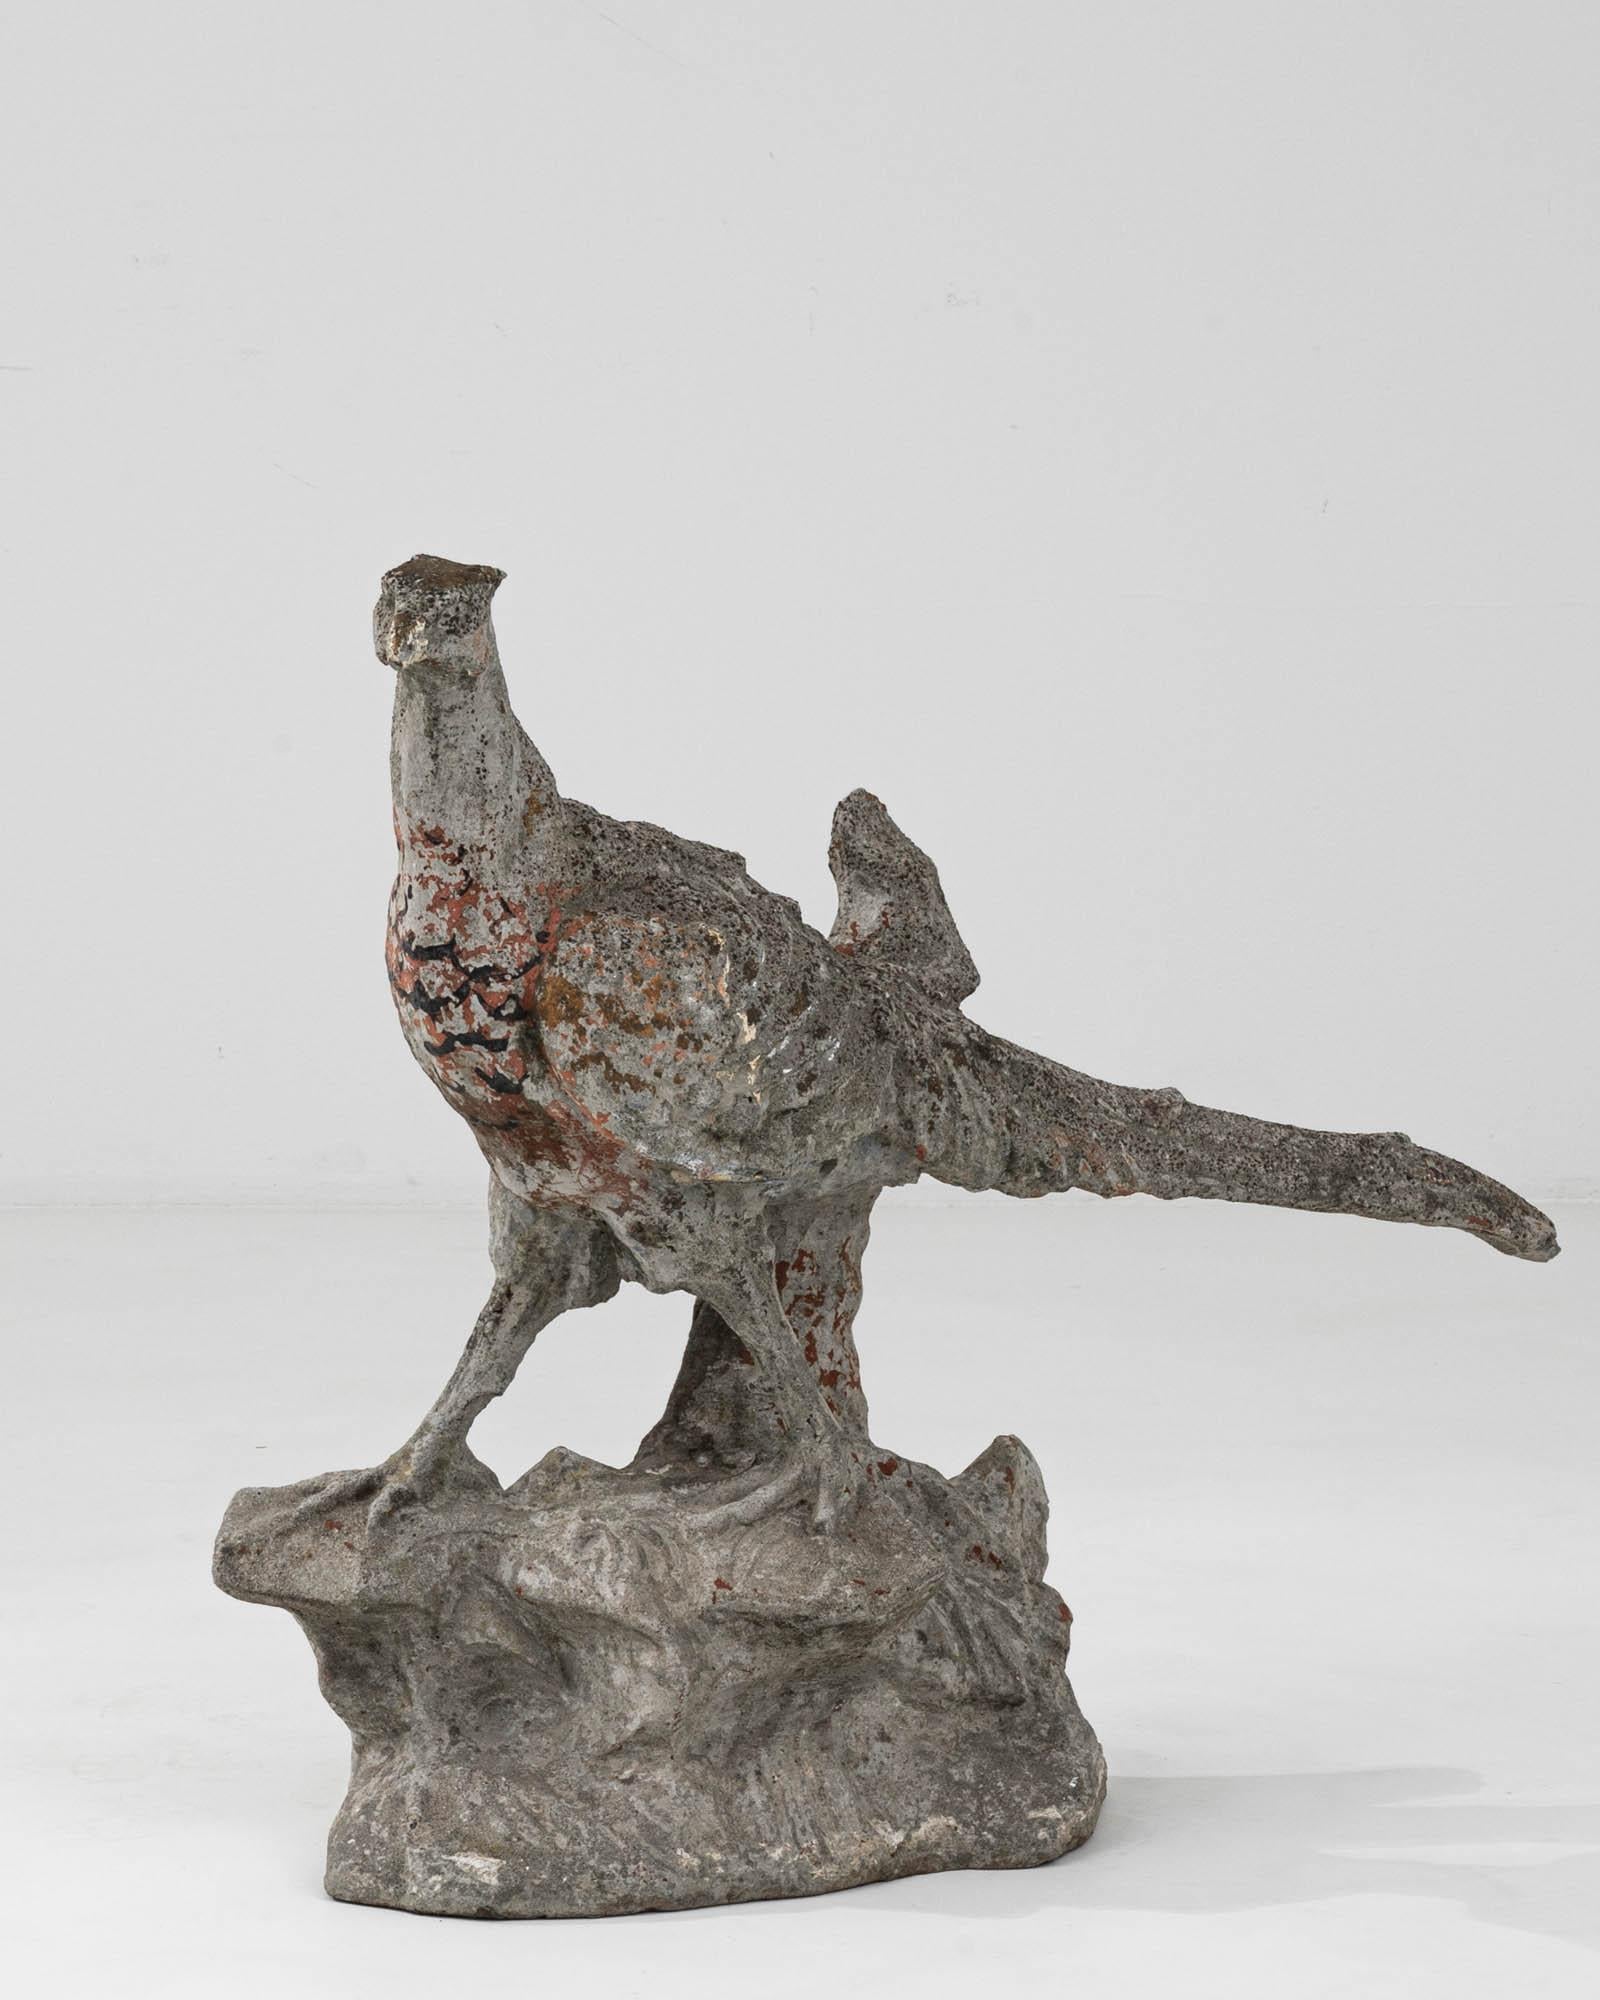 This 20th Century French Concrete Sculpture exudes a character that is both rustic and elegant. Sculpted with care, the bird form stands proudly, exhibiting an artistic balance of realism and abstraction that was popular in early modernist pieces.